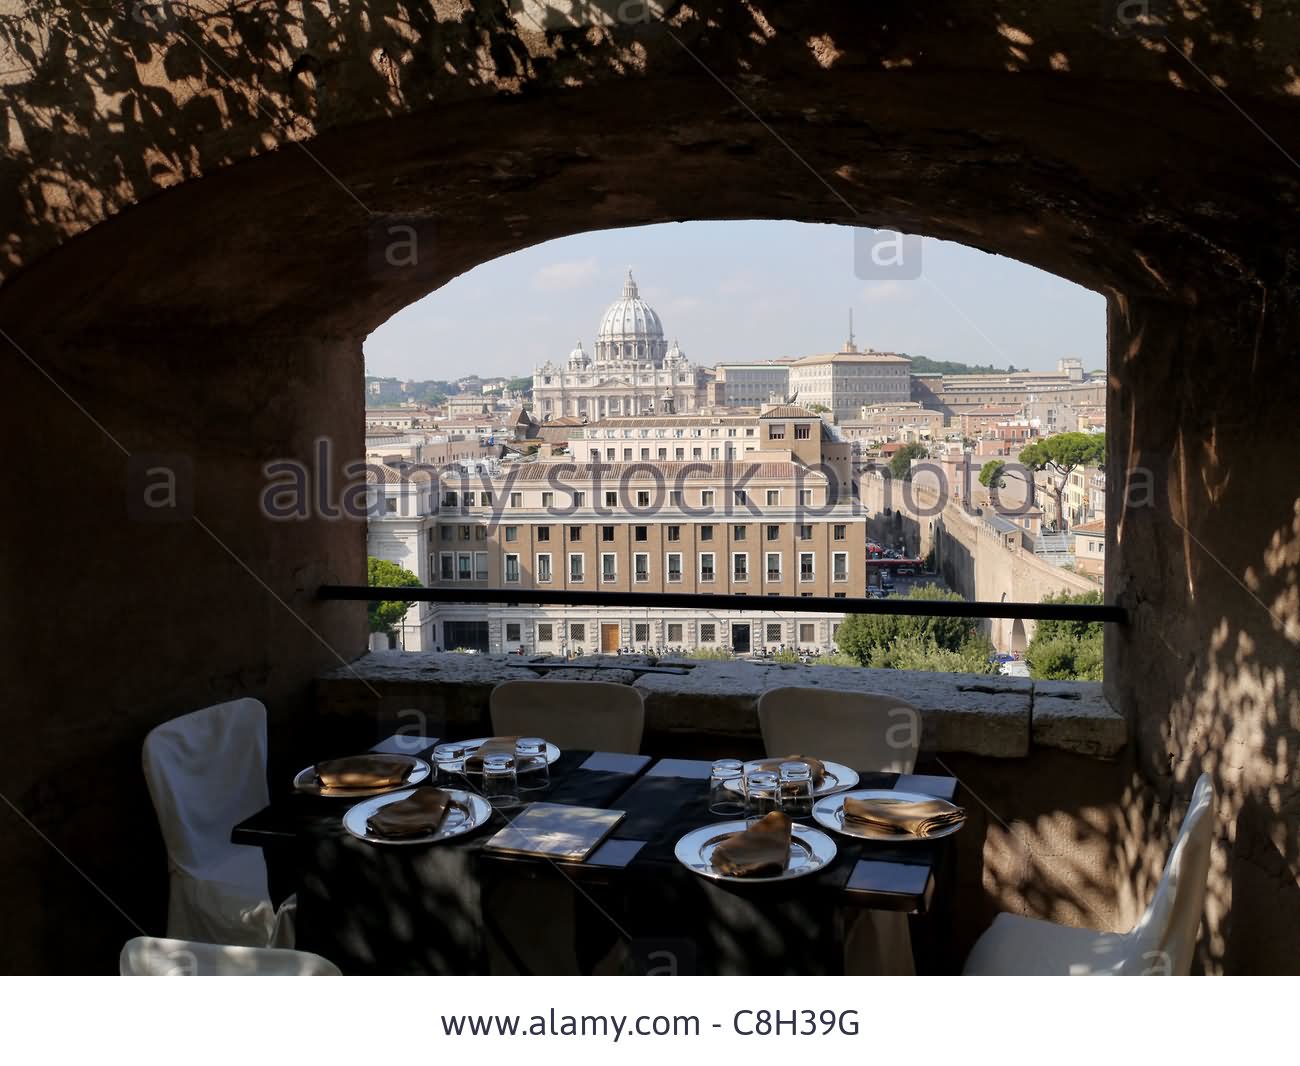 View Of St. Peter Basilica From Restaurant Inside Castel Sant'Angelo